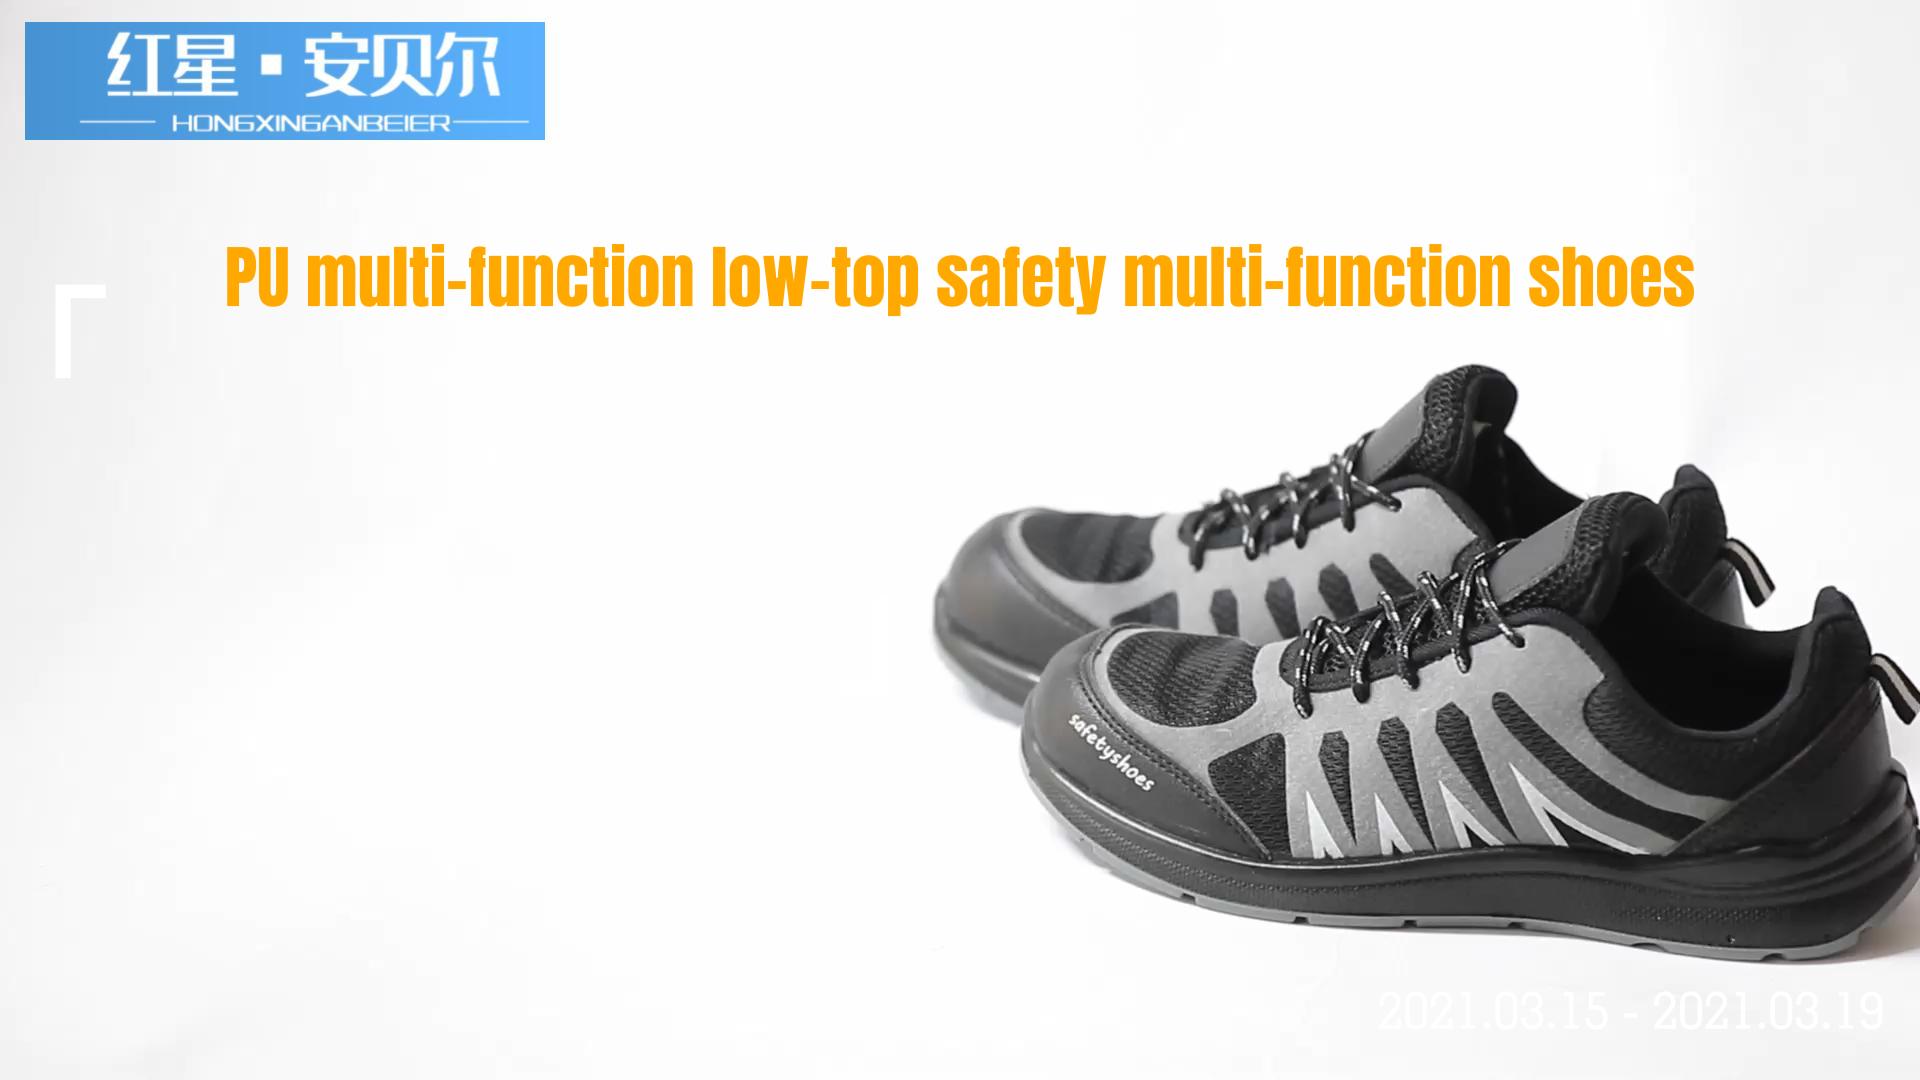 PU multi-function low-top safety multi-function sh